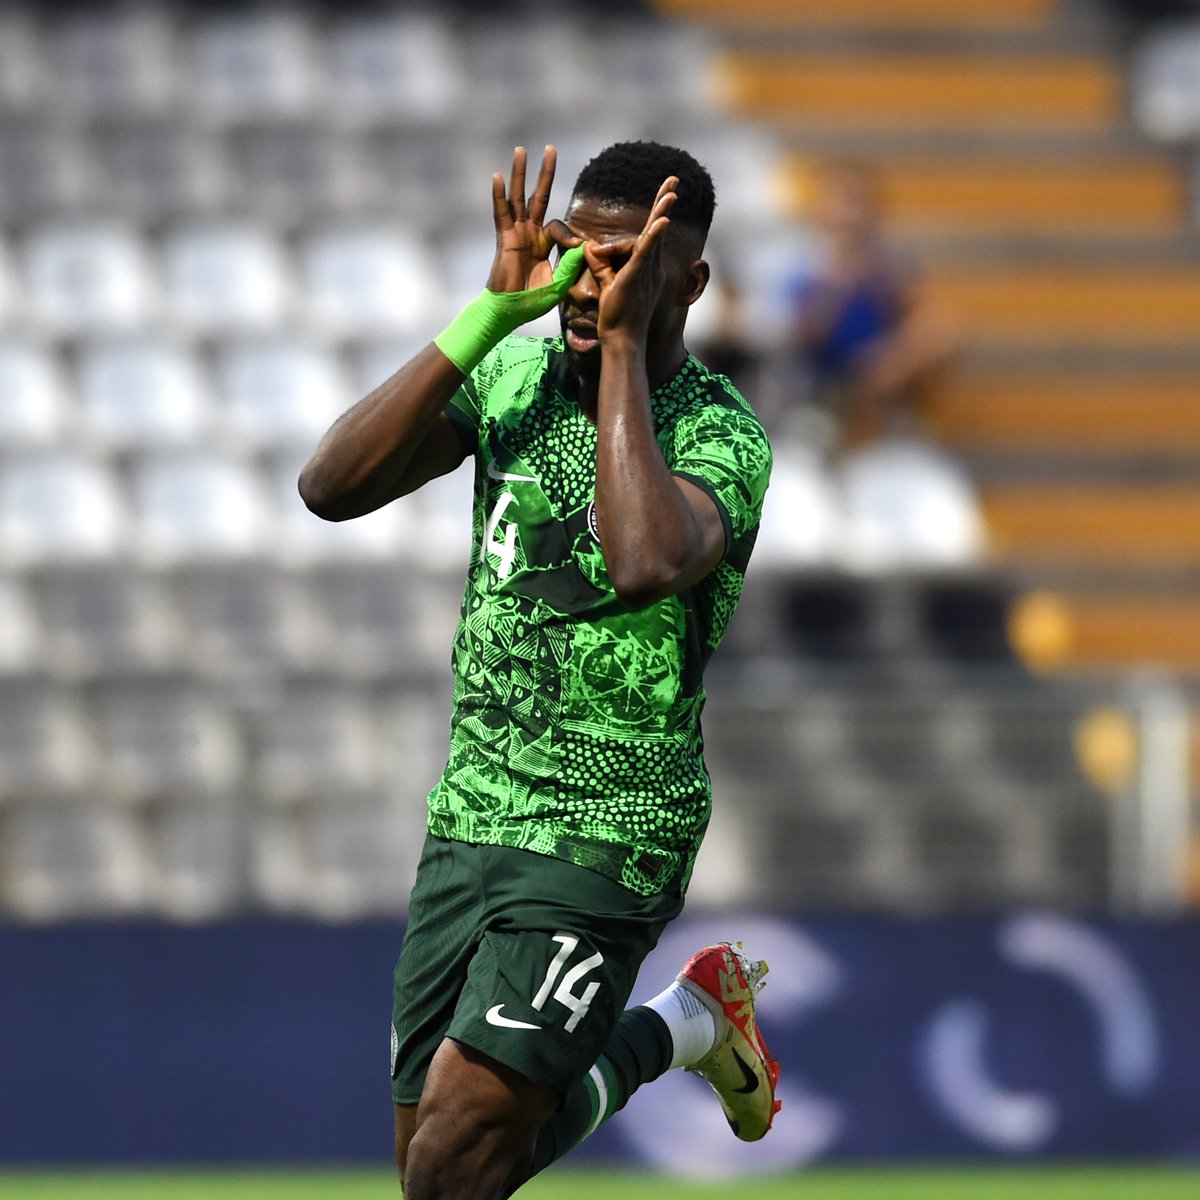 Wishing Seniorman the best of luck in tonight's #AFCON2023 Final! 🇳🇬 🦅